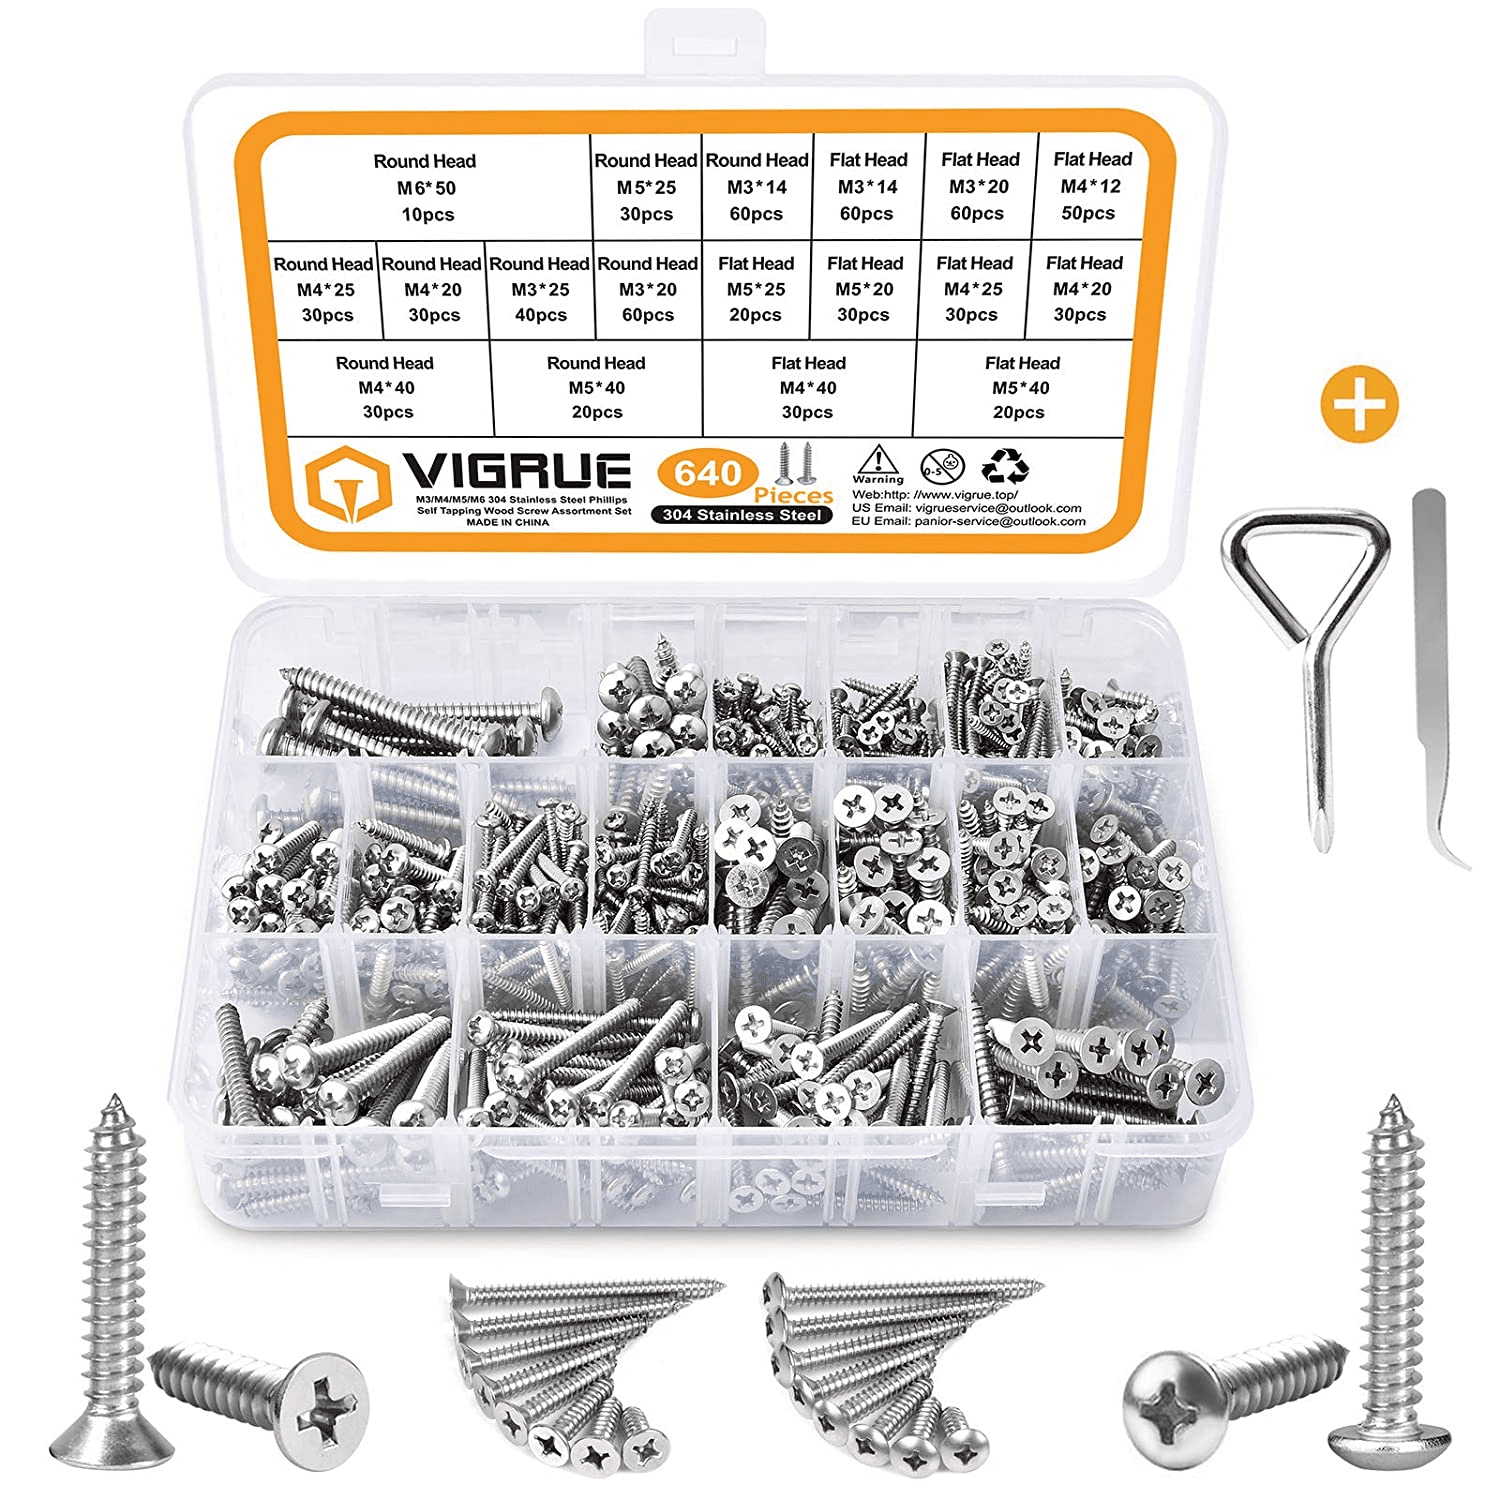 100 Pieces M3 x 40mm 304 Stainless Steel Phillips Pan Head Self Tapping Screw 